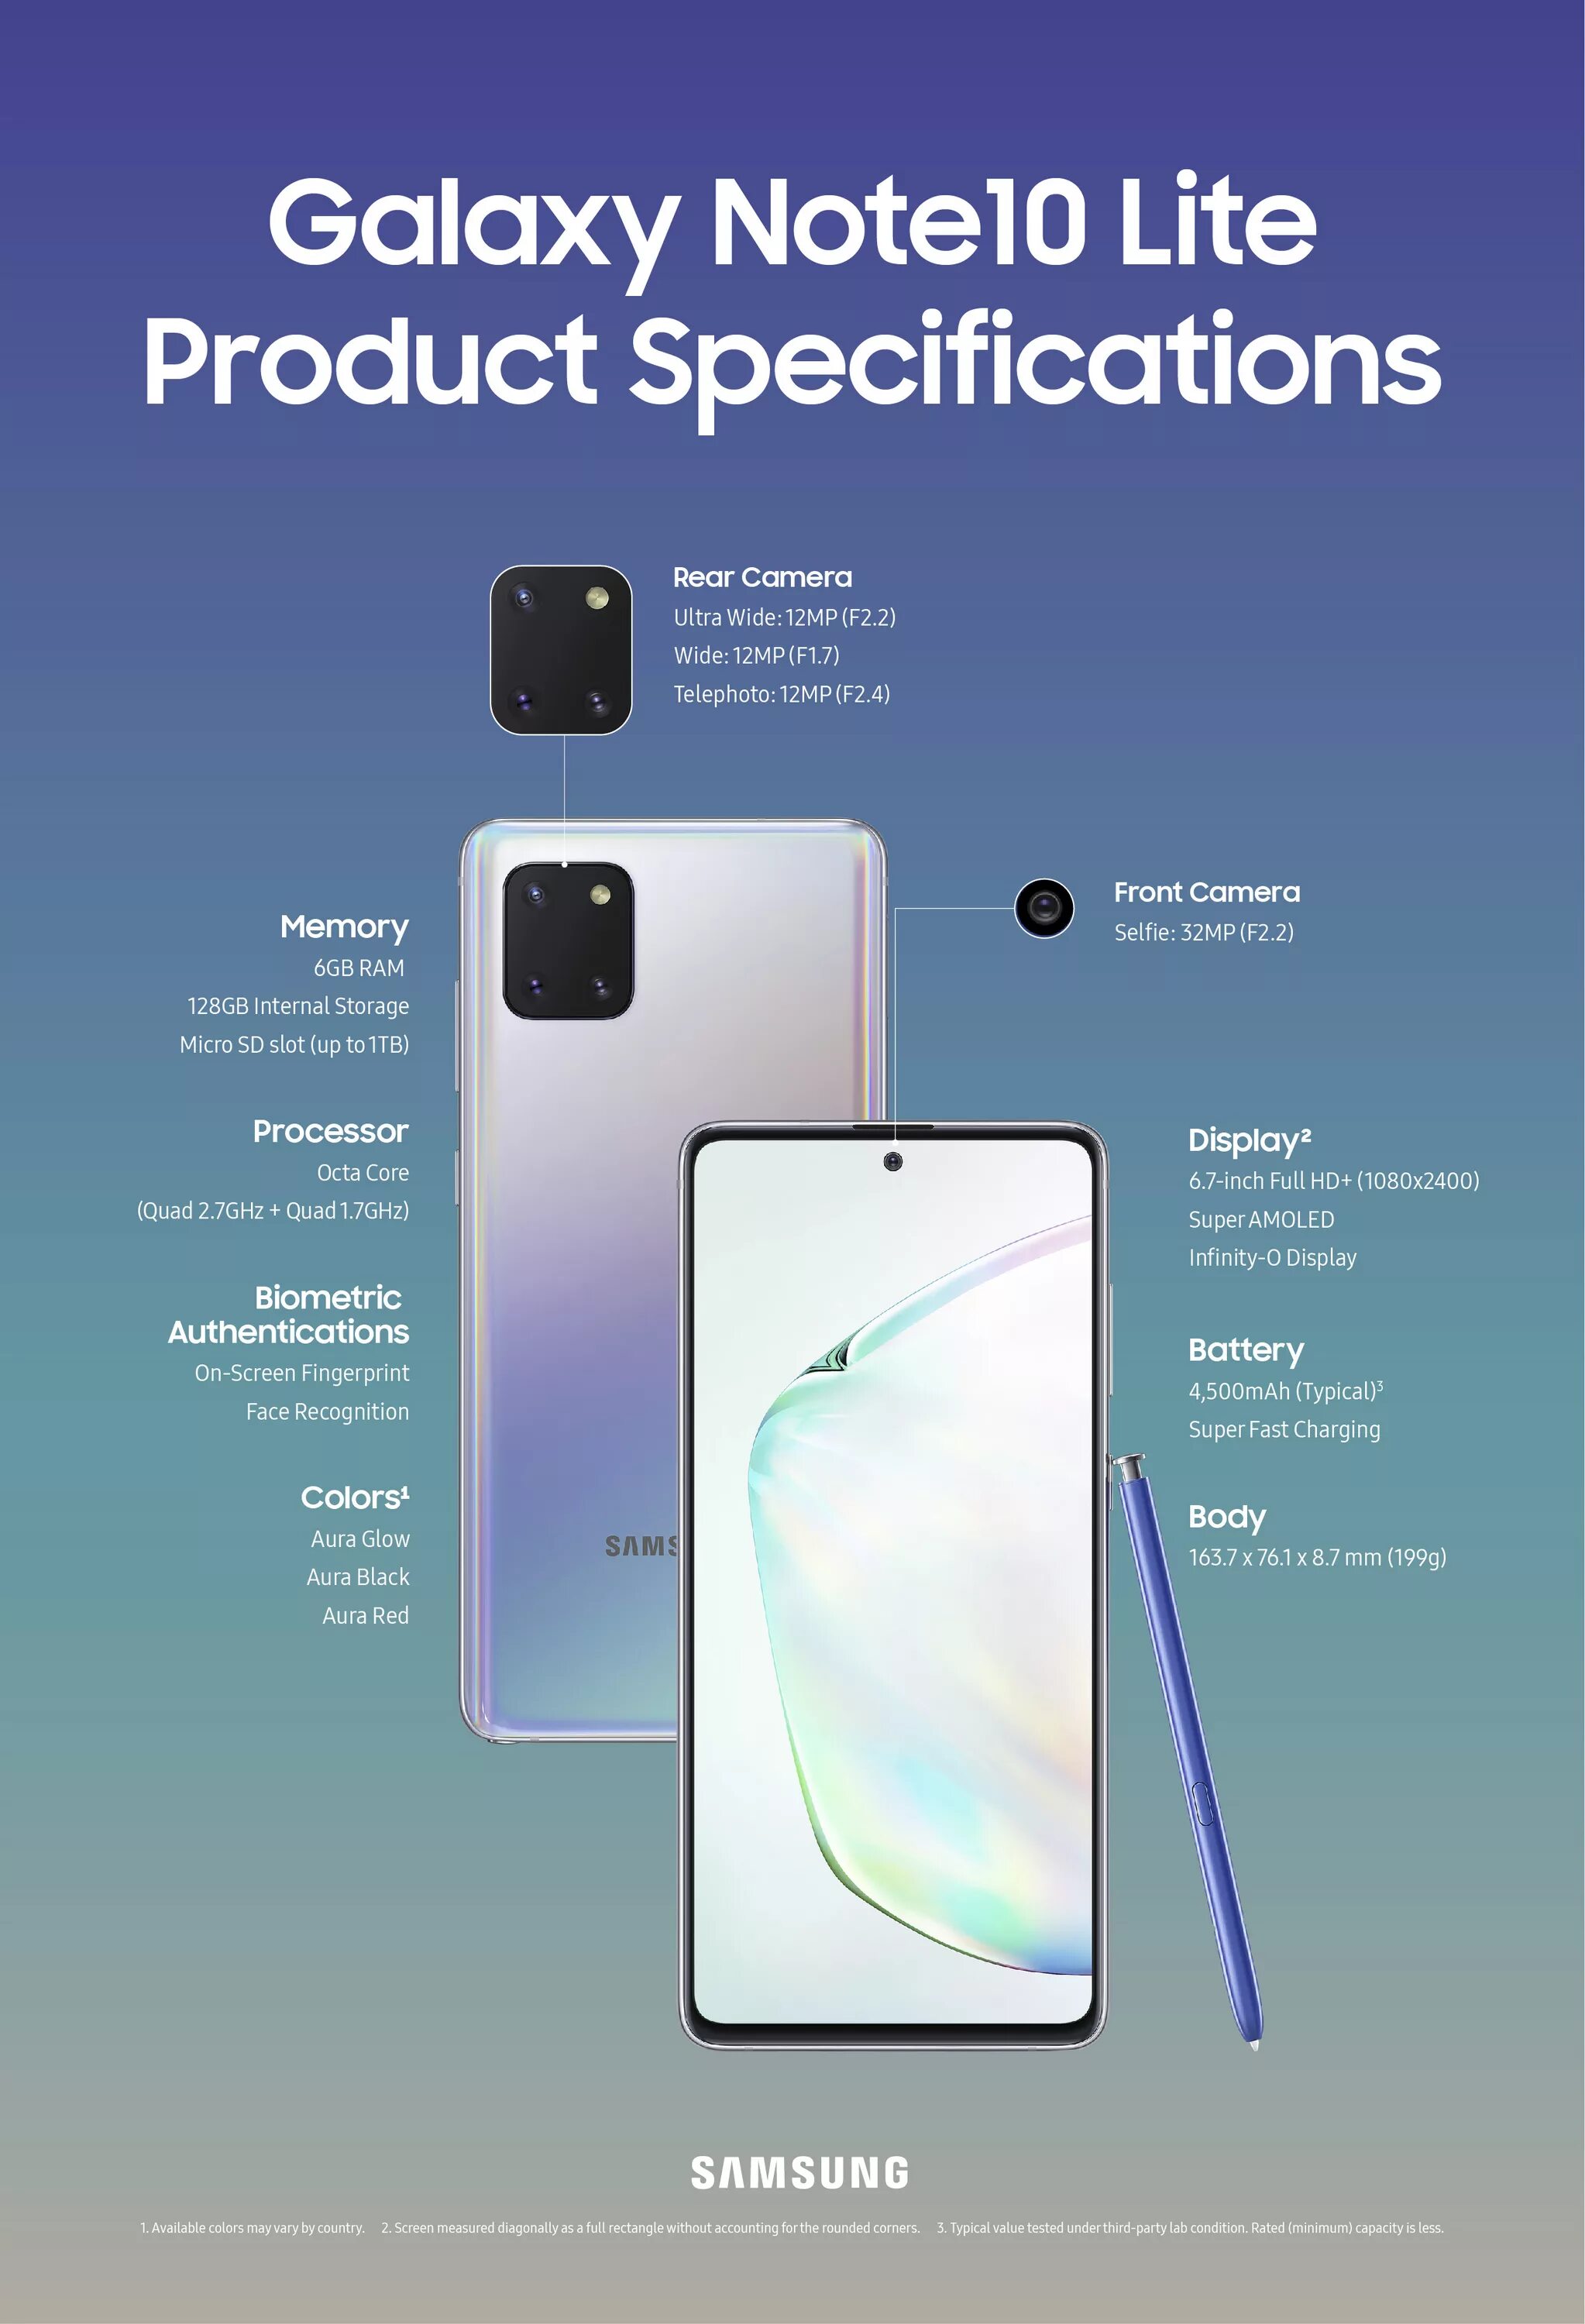 Samsung Galaxy s10 Note. Смартфон Samsung Galaxy Note 10 Lite. Samsung Galaxy s10 Lite. Samsung Galaxy Note s10 Lite. Product specification